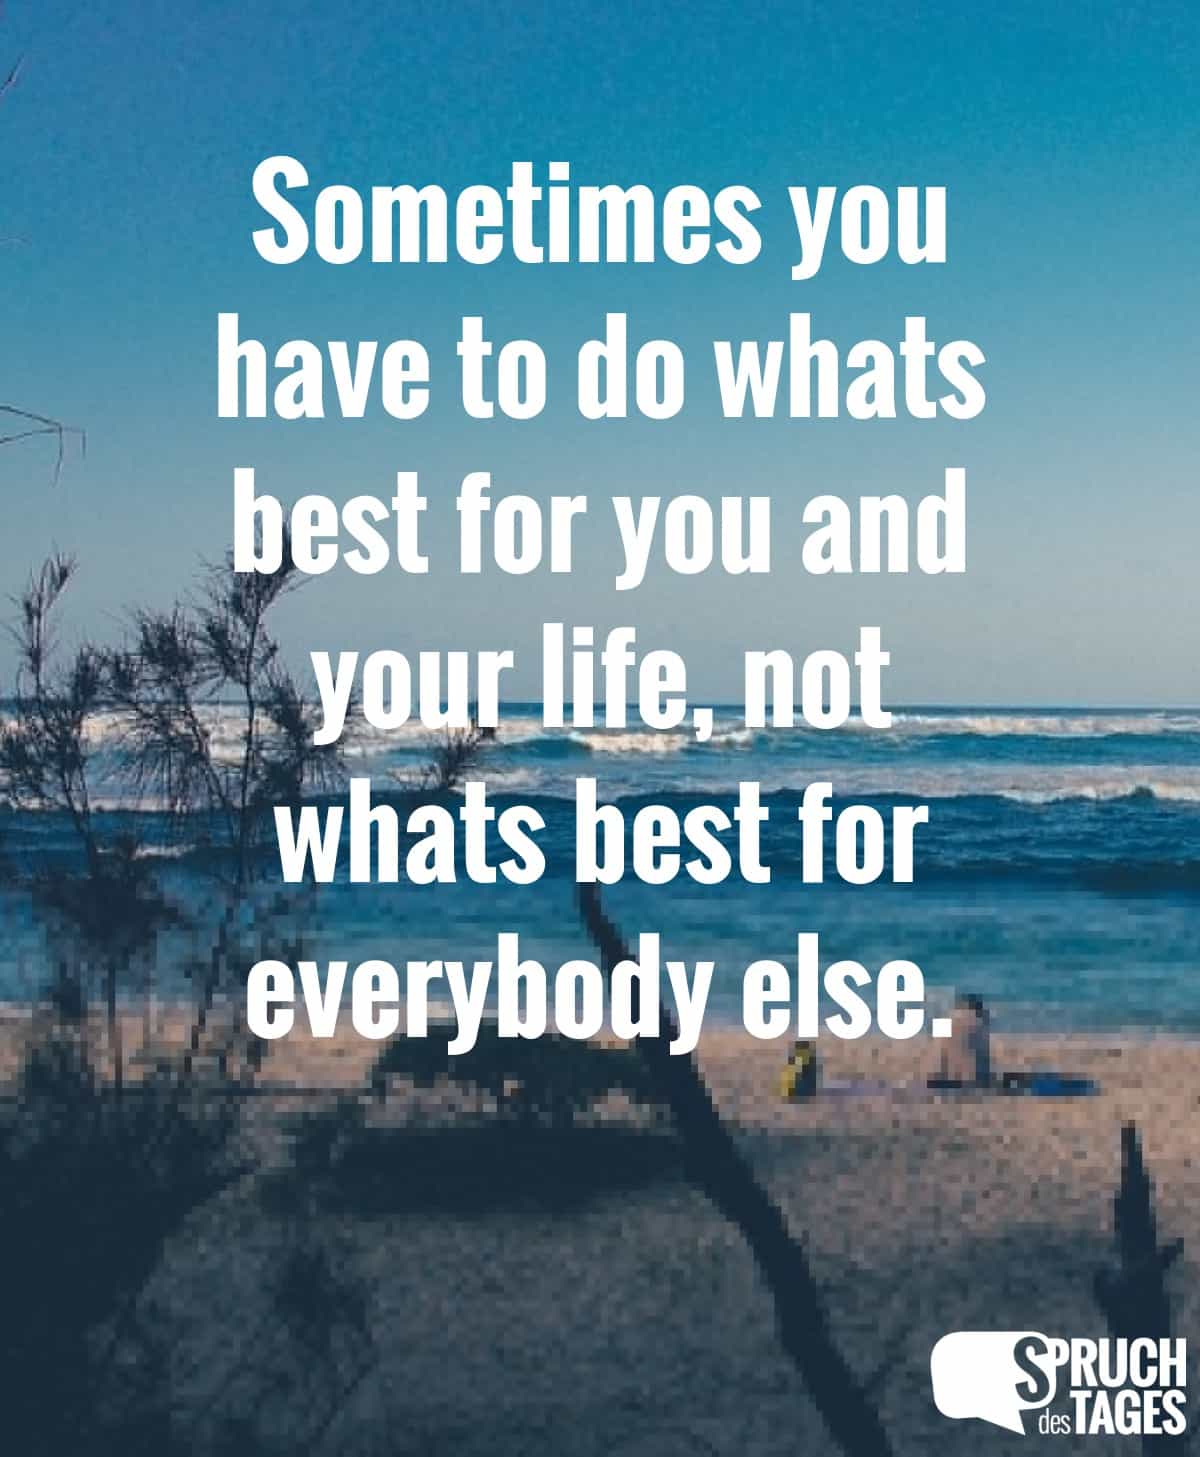 Sometimes you have to do whats best for you and your life not whats best